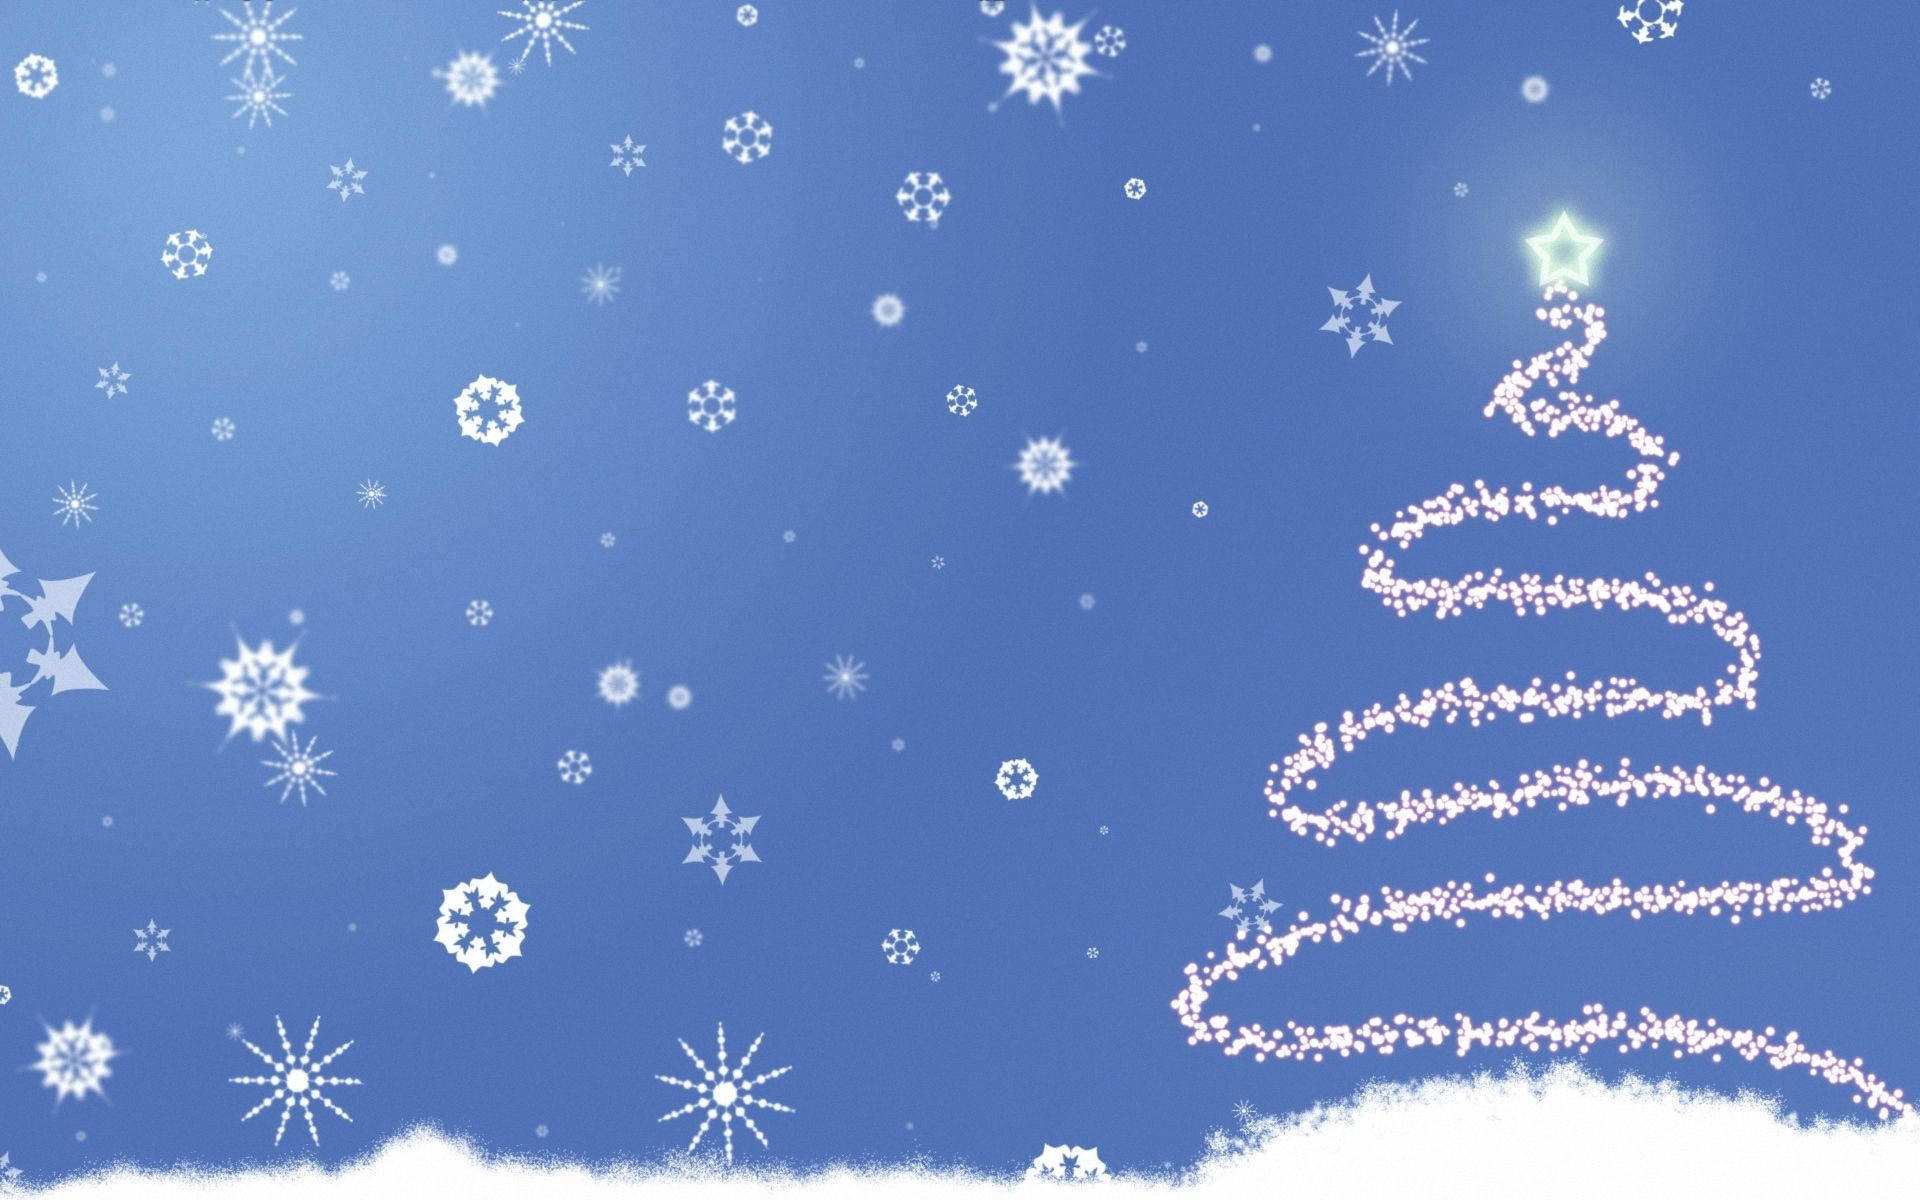 Enjoy Winter's Beauty With This Picture Of A Blue Christmas. Background